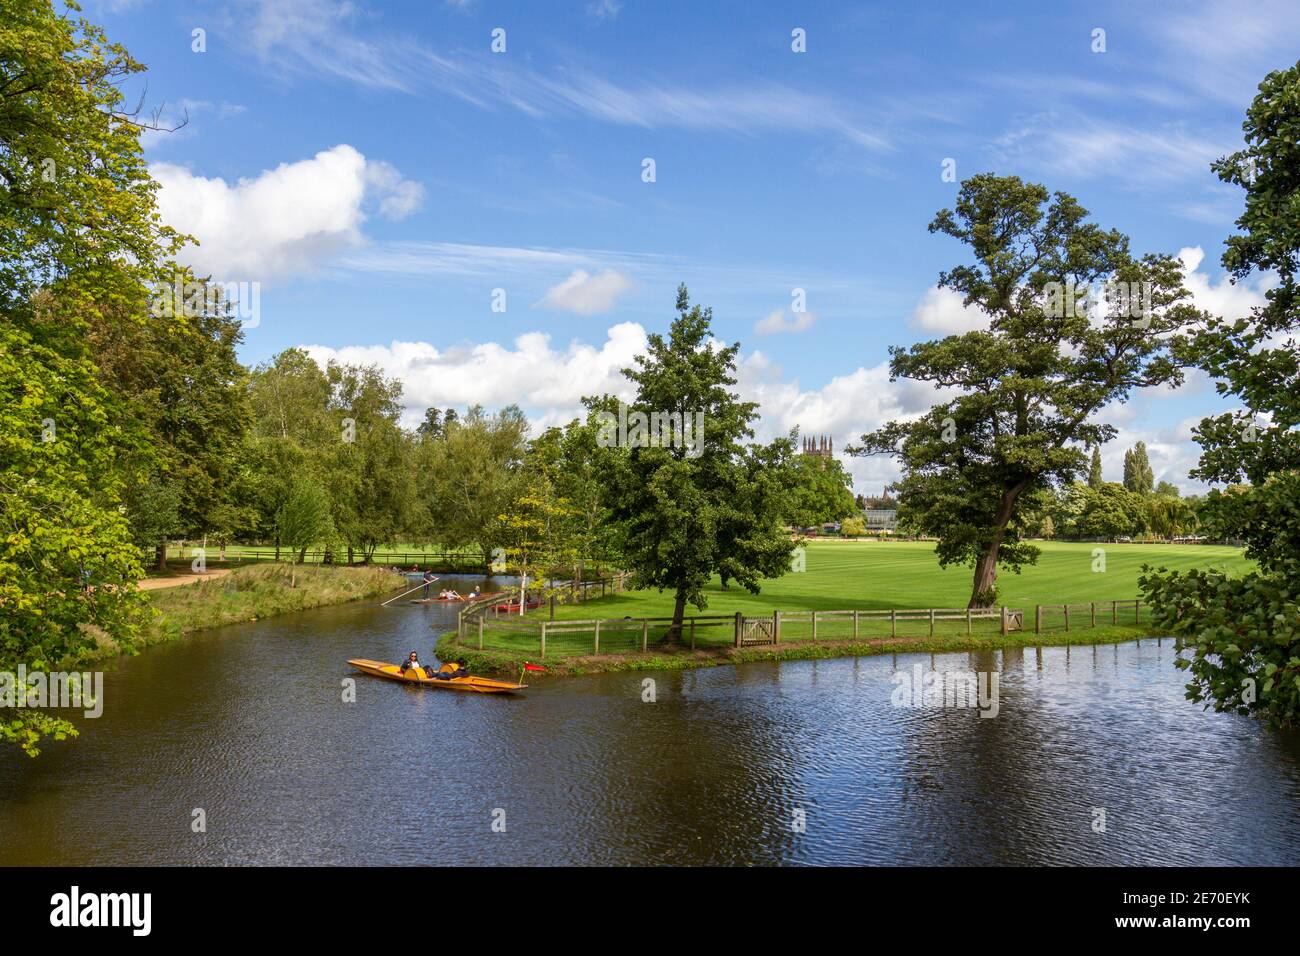 A group kayaking on the River Cherwell in Oxford, Oxfordshire, UK. Stock Photo